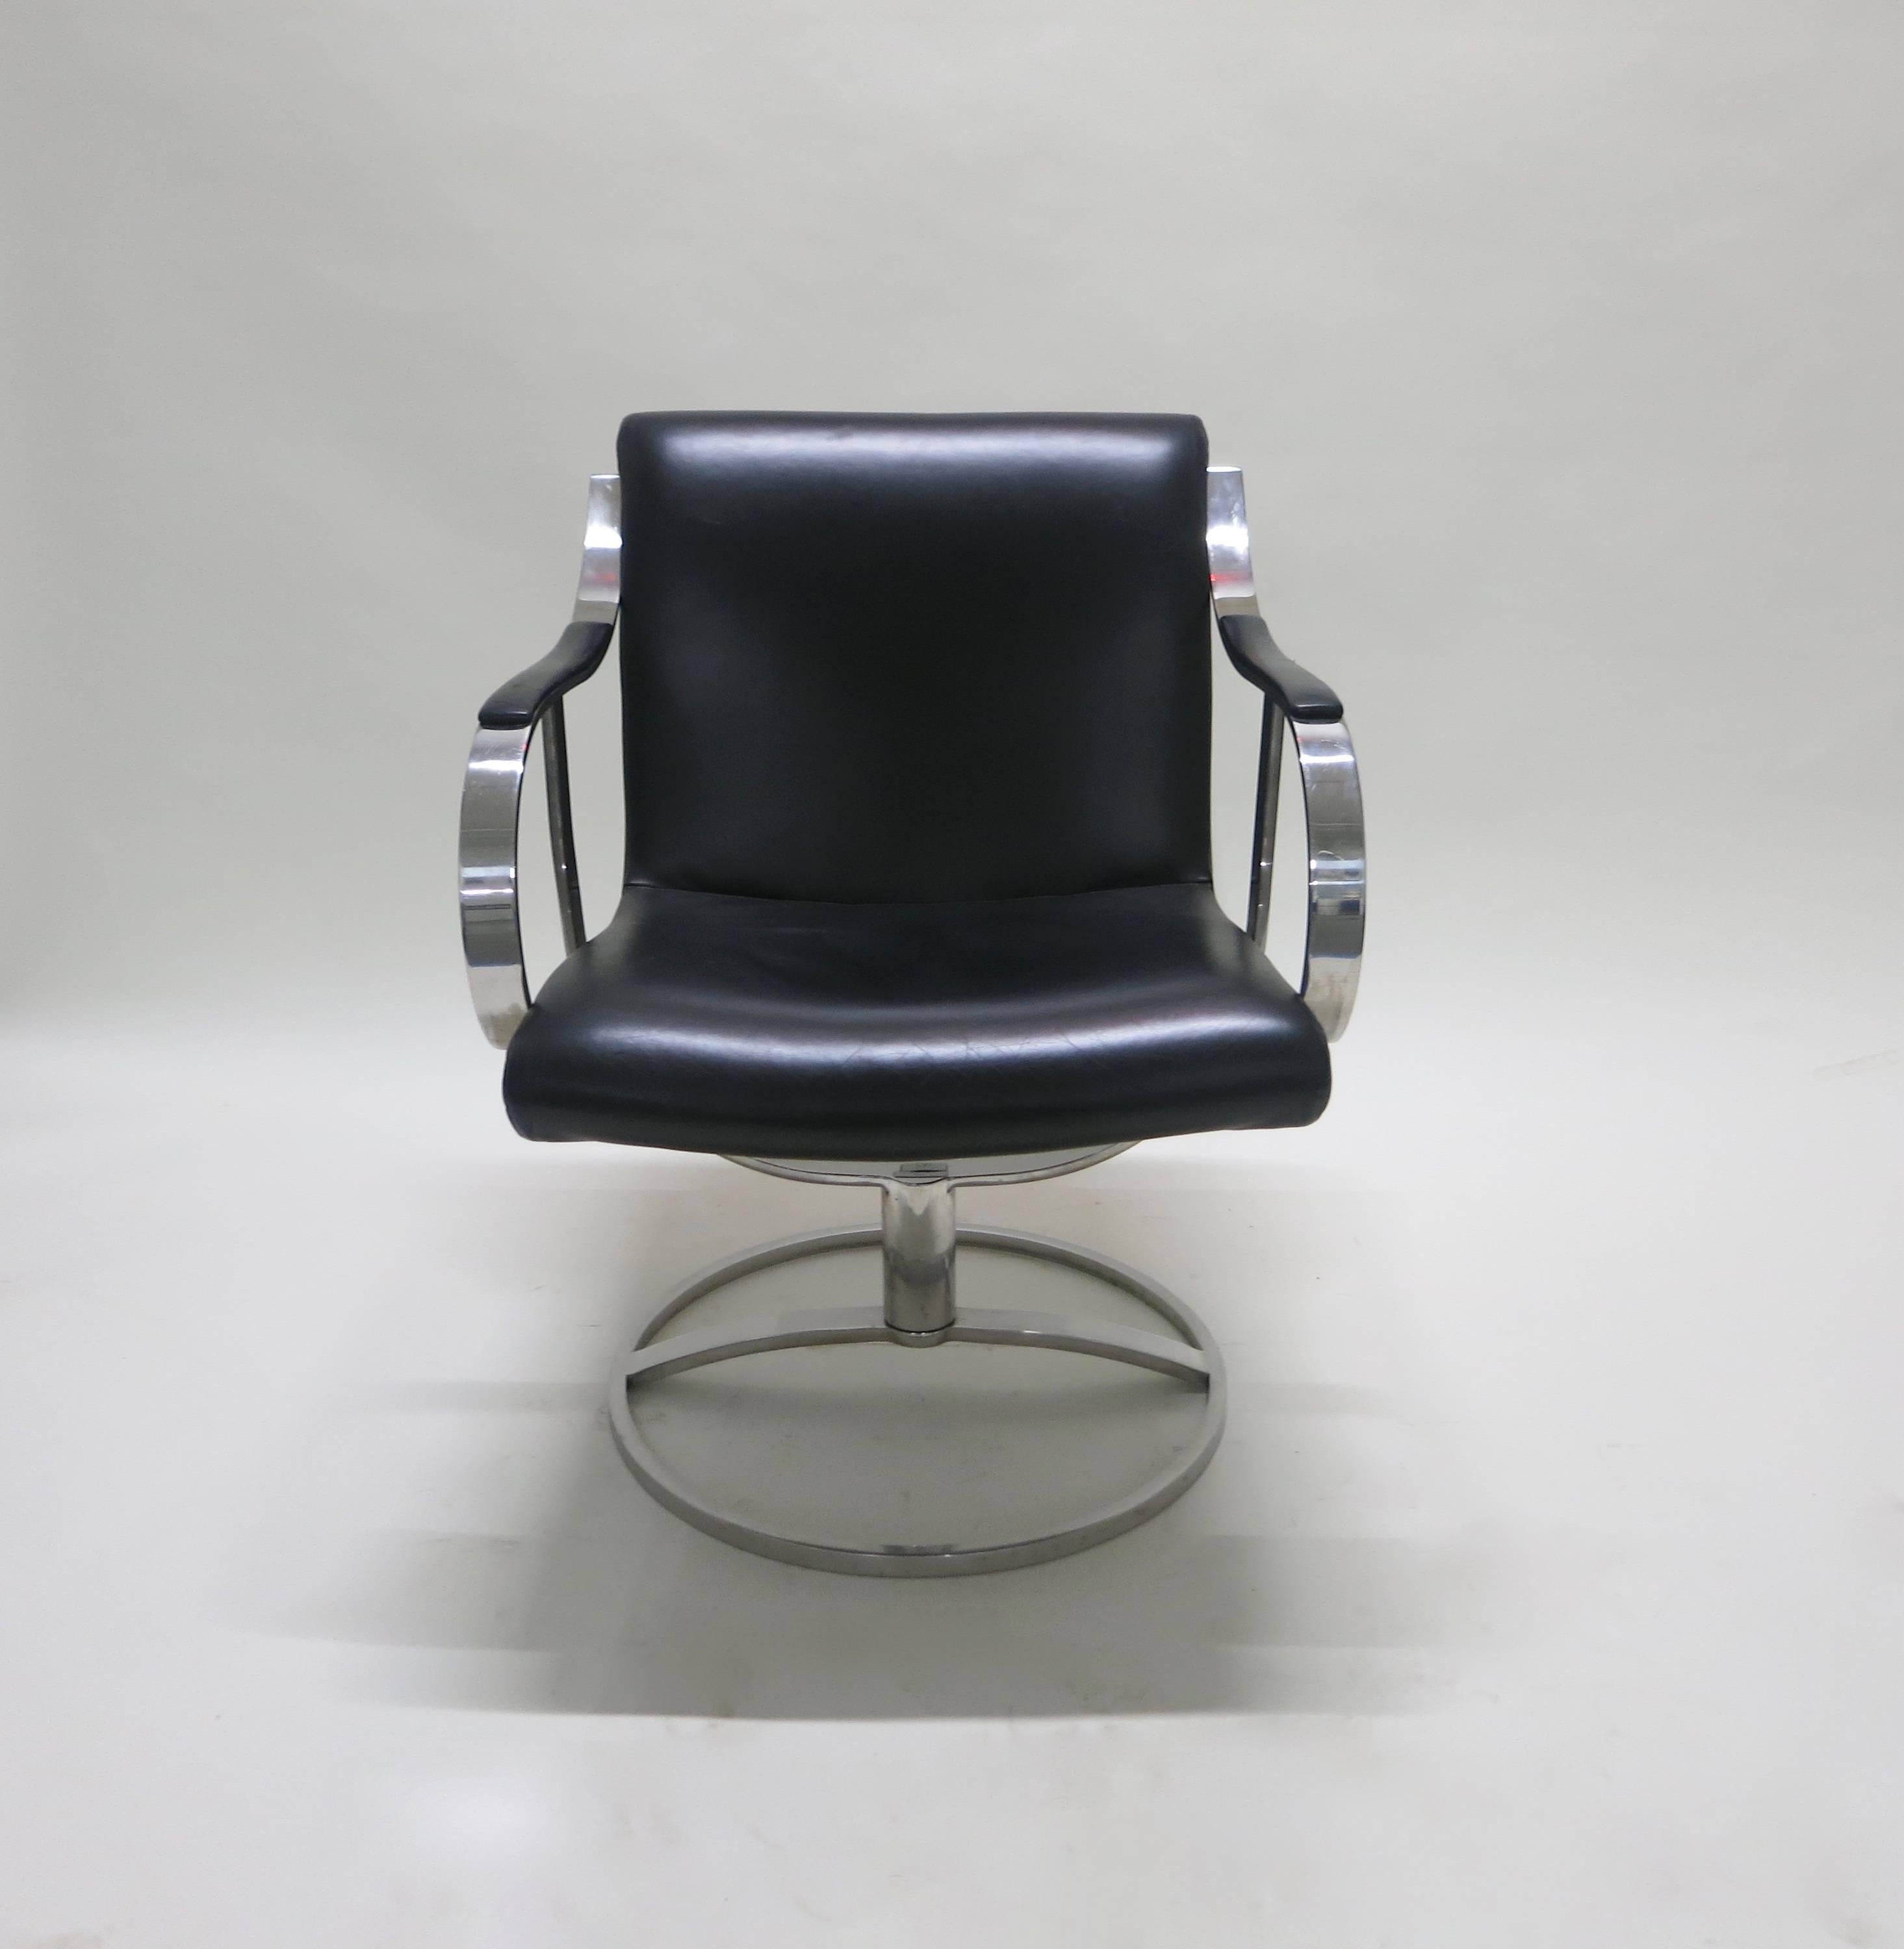 Mid-Century Modern Pair of Swivel Chairs by Gardner Leaver for Steelcase, circa 1965, American